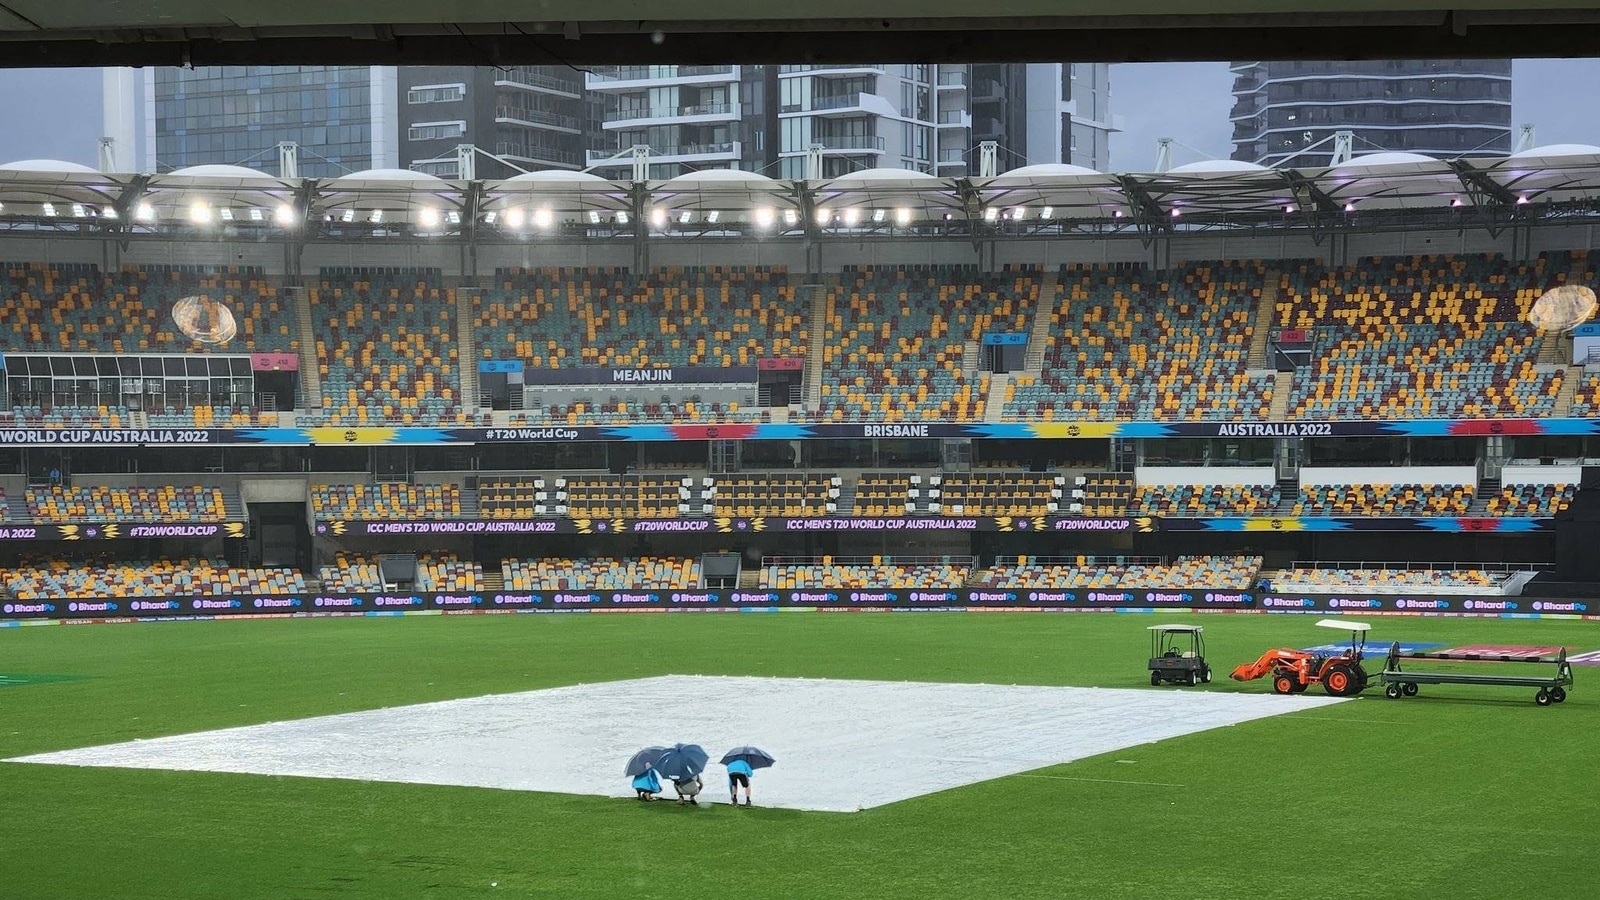 India vs New Zealand T20 World Cup warm-up Highlights Match called off due to rain in Brisbane Hindustan Times